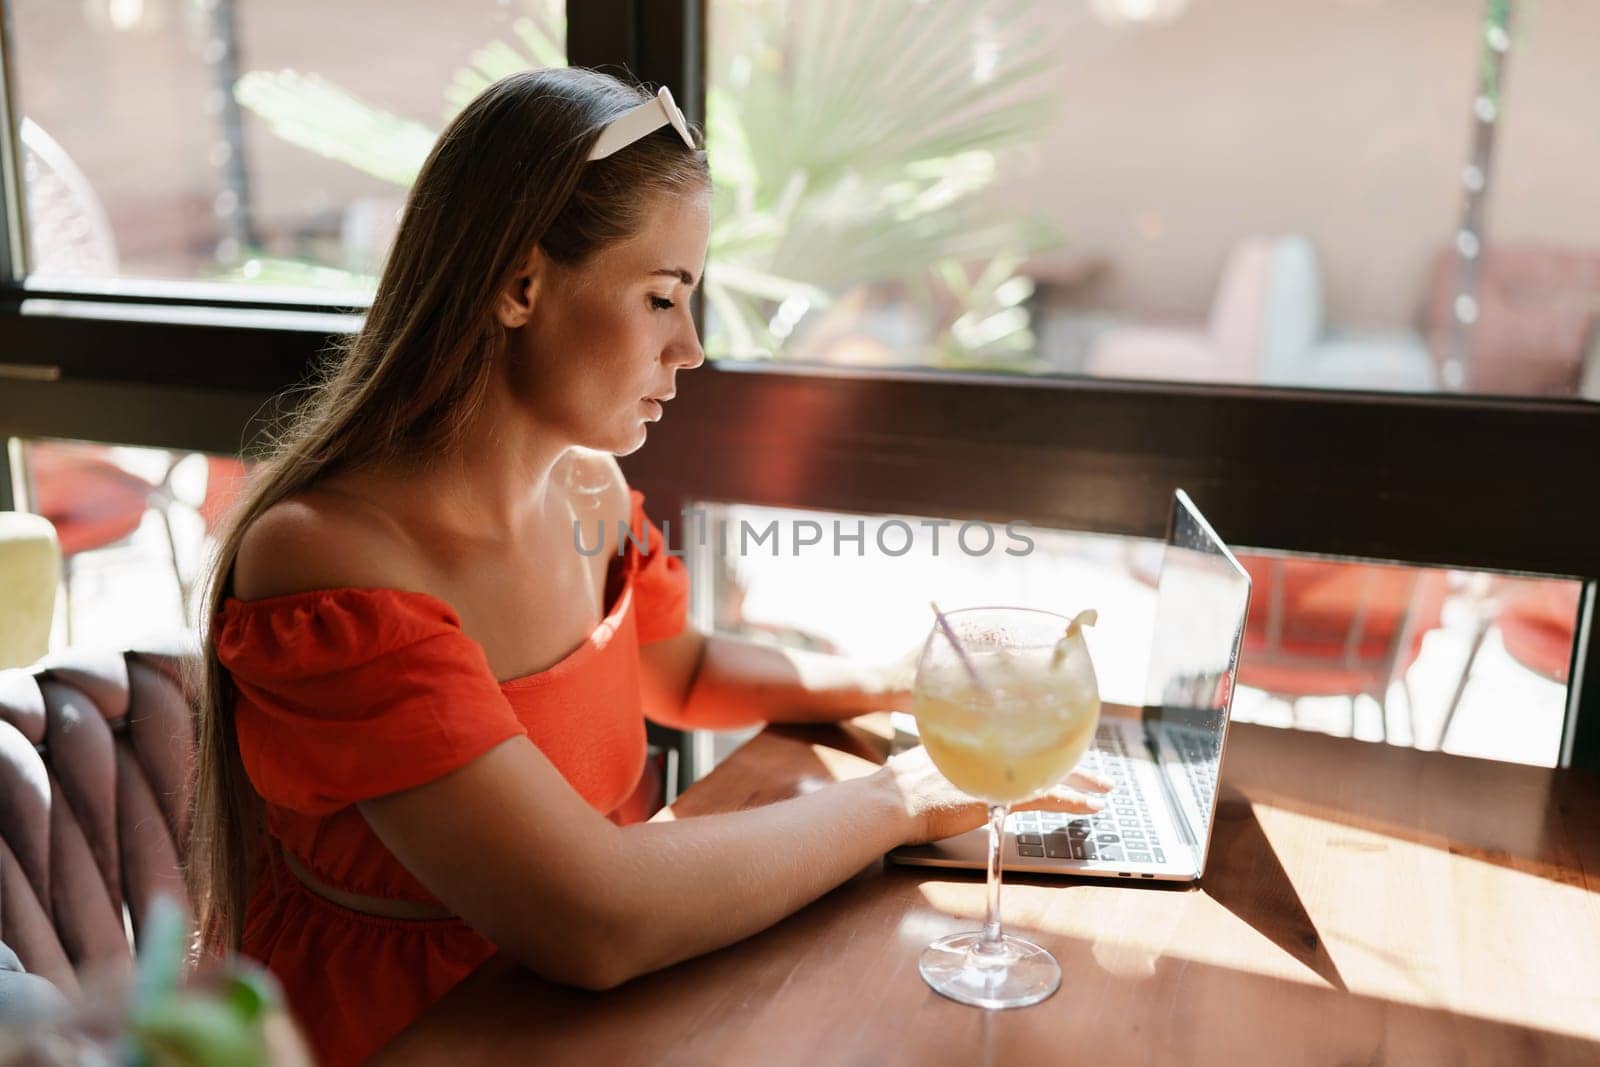 Woman works on laptop in a sunny cafe, glass of juice nearby. The setting is modern, with natural light illuminating the space. The image captures a moment of focused work. by Matiunina